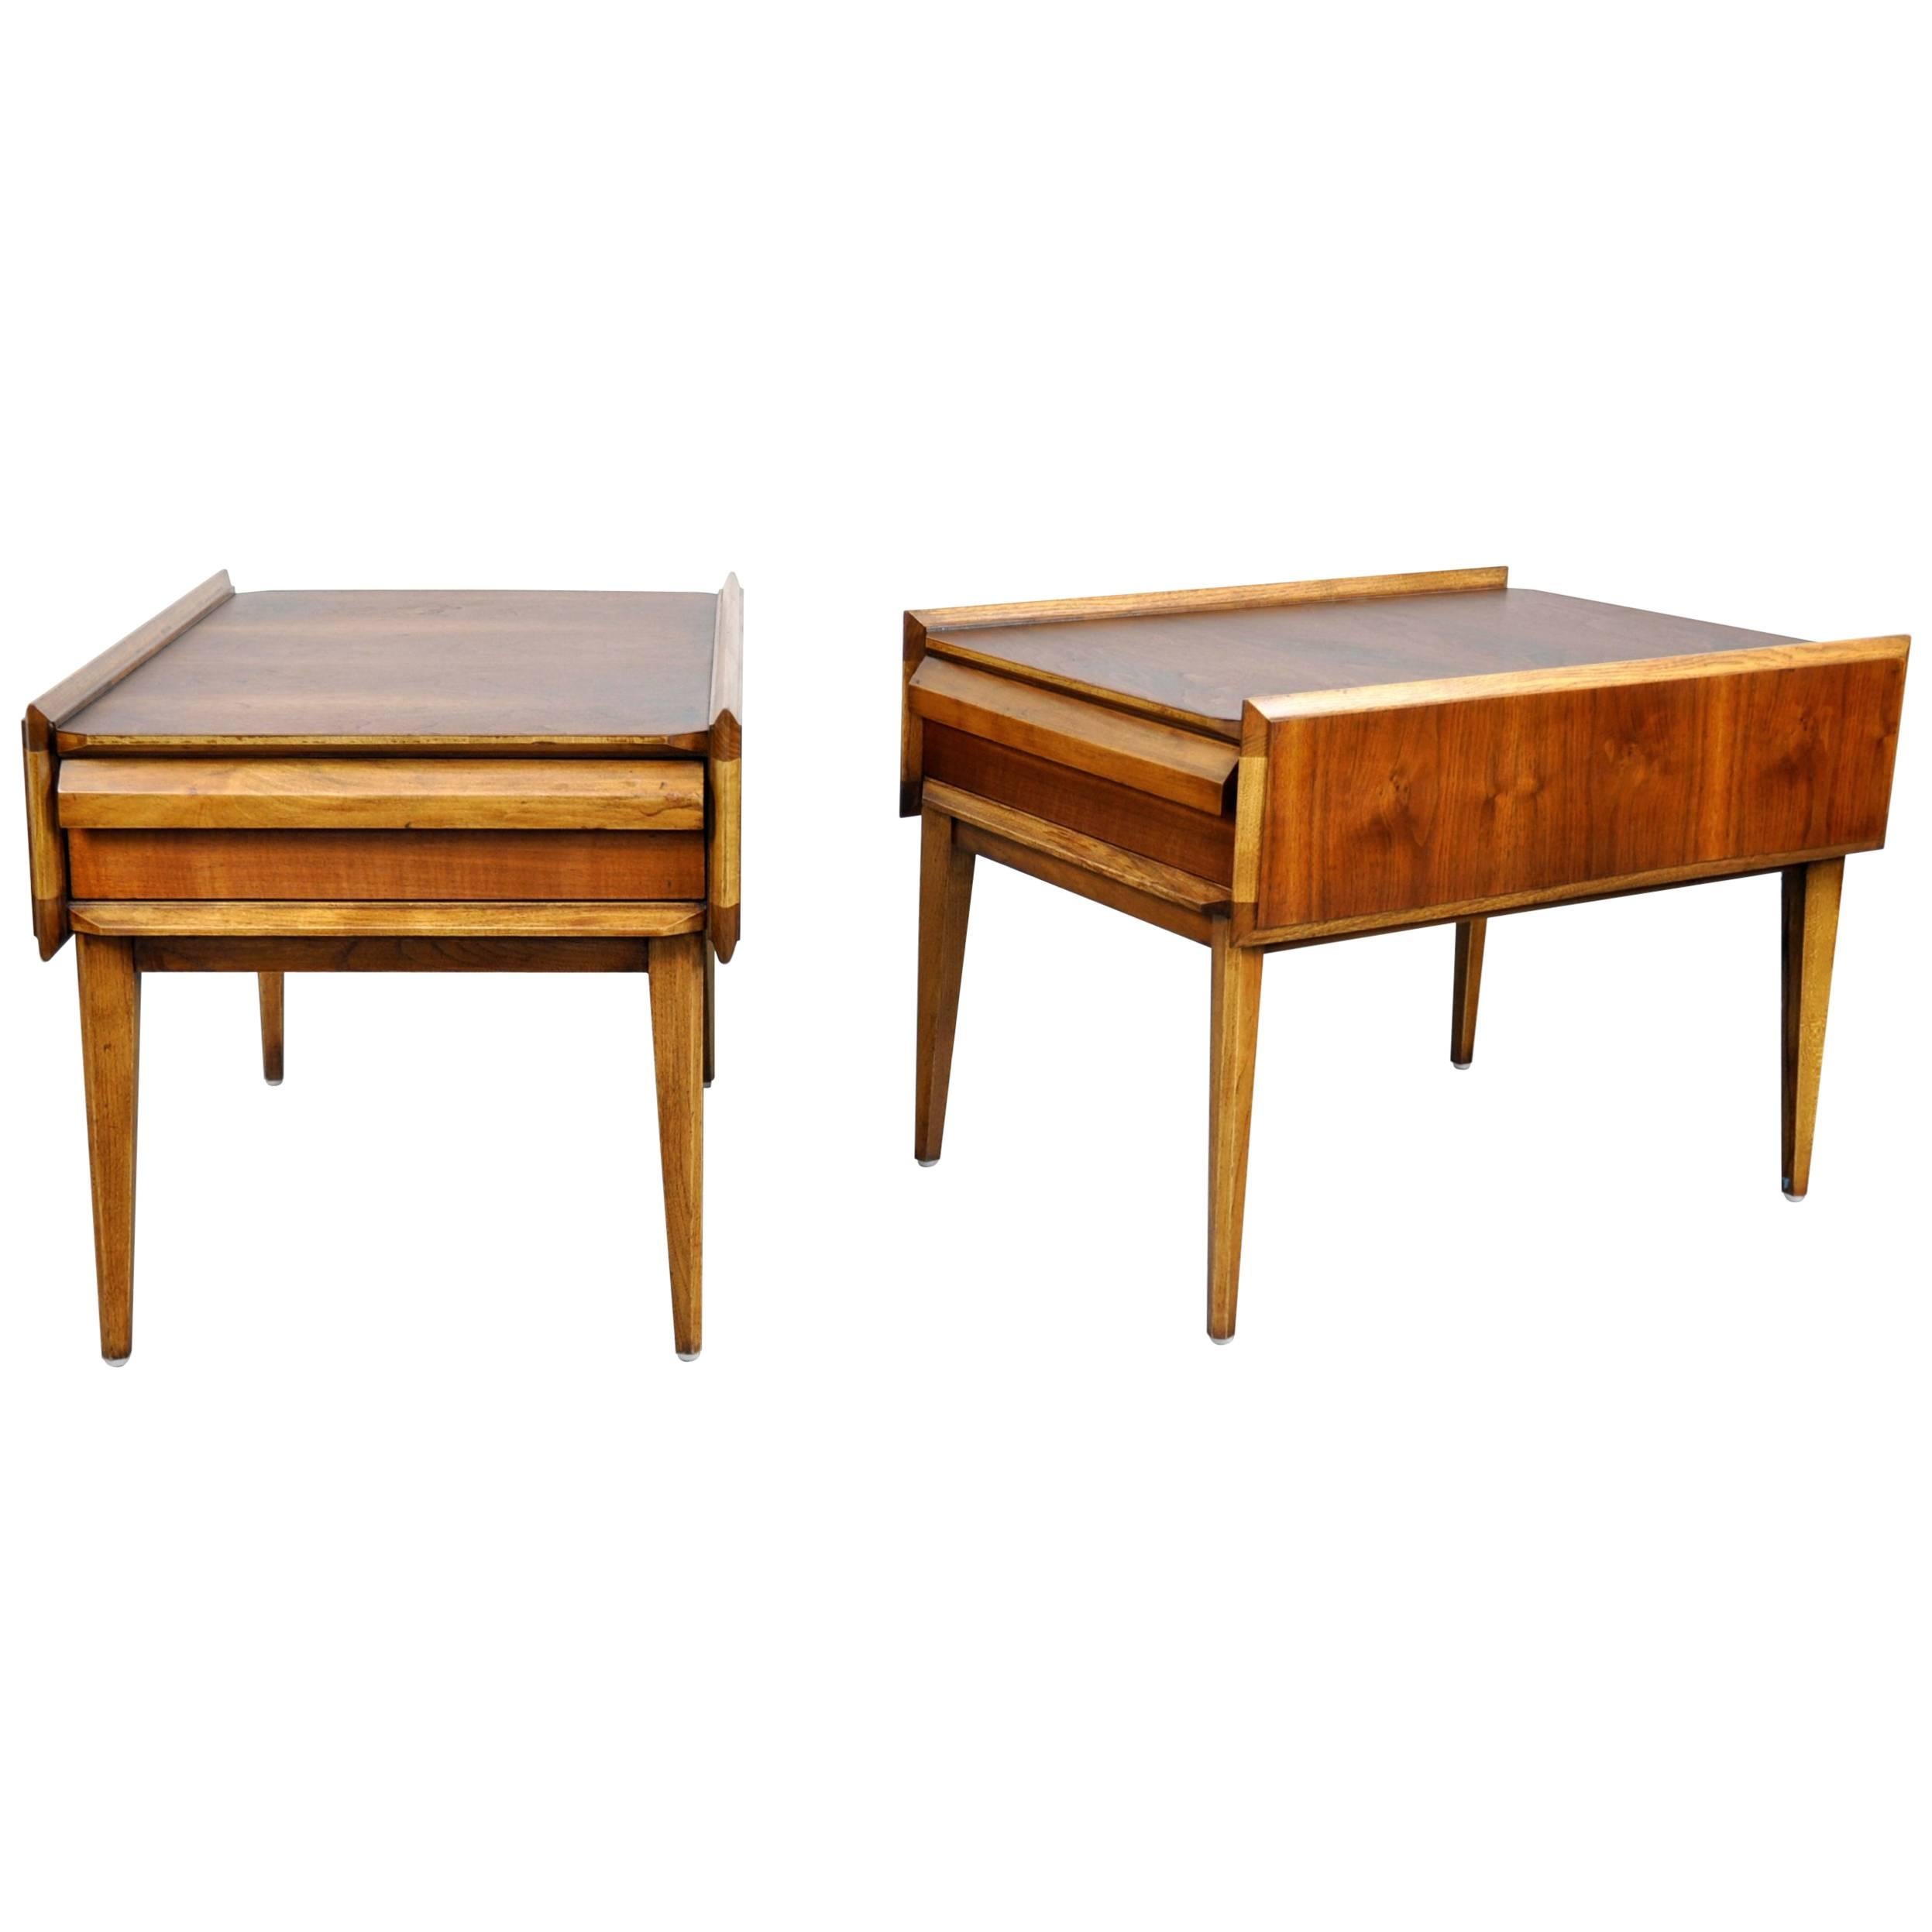 Pair of Lane First Edition Walnut and Pecan Side Tables